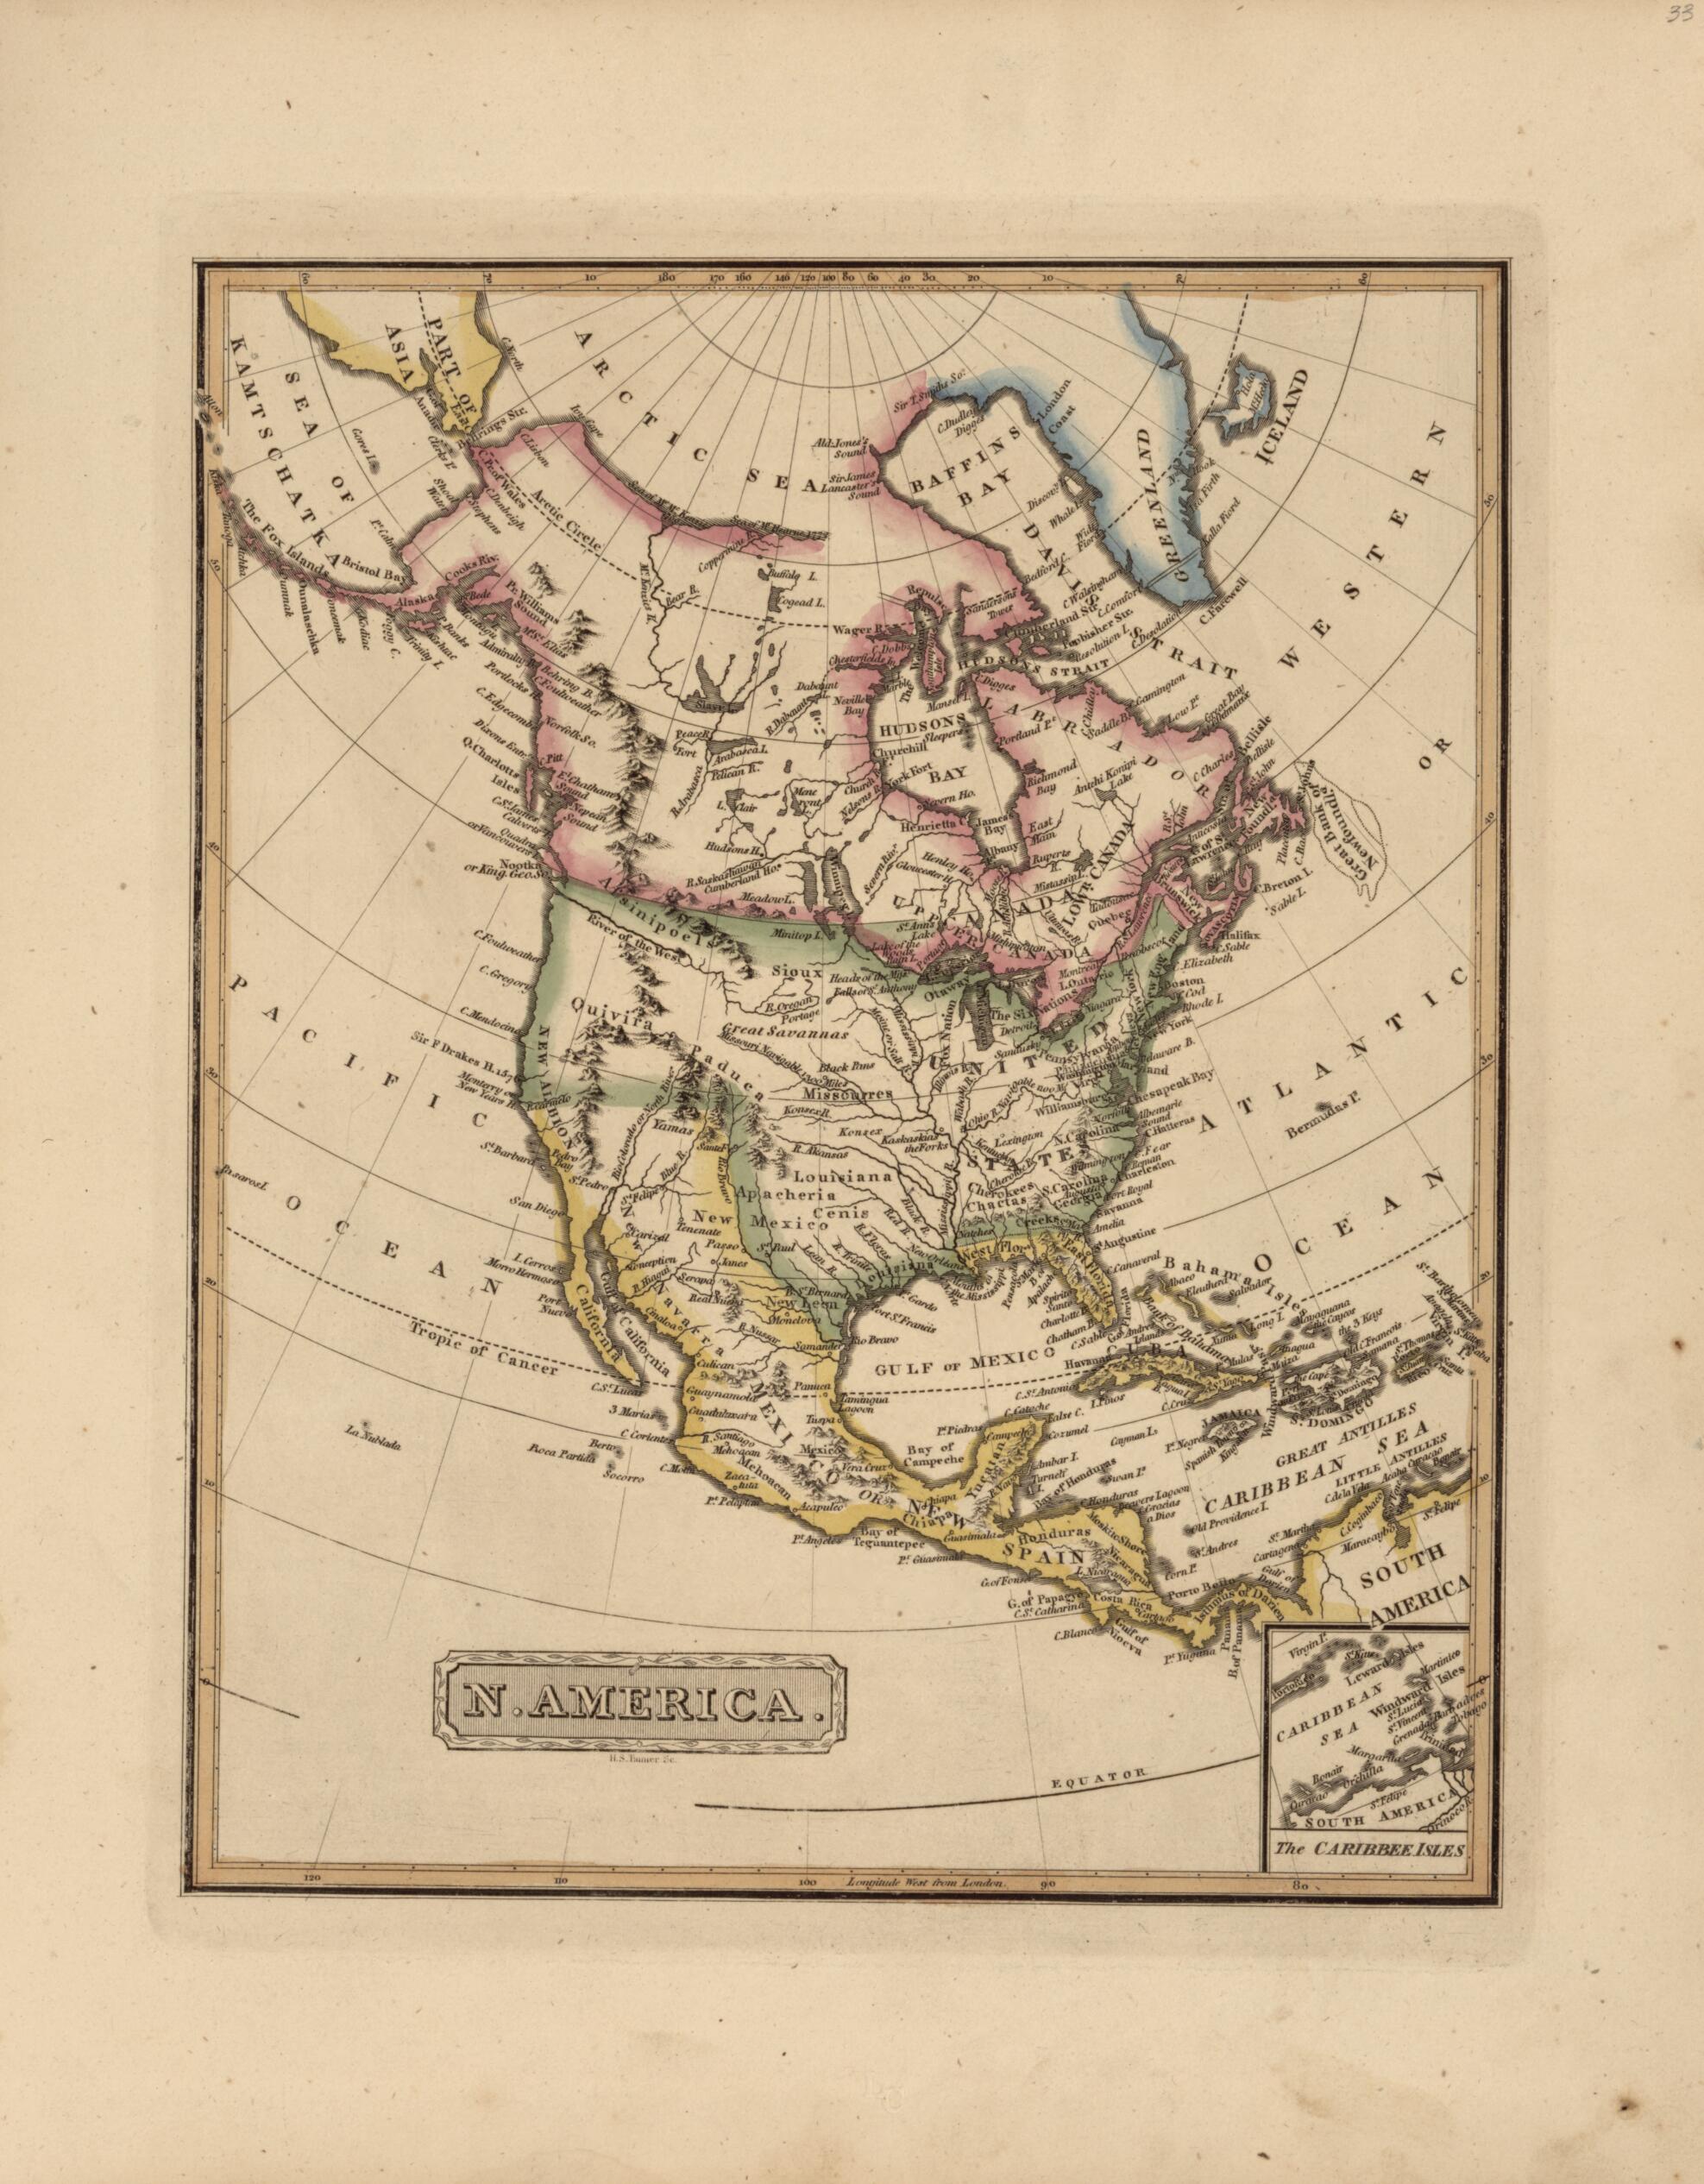 This old map of North America from a New and Elegant General Atlas, Containing Maps of Each of the United States. from 1817 was created by Henry Schenck Tanner in 1817